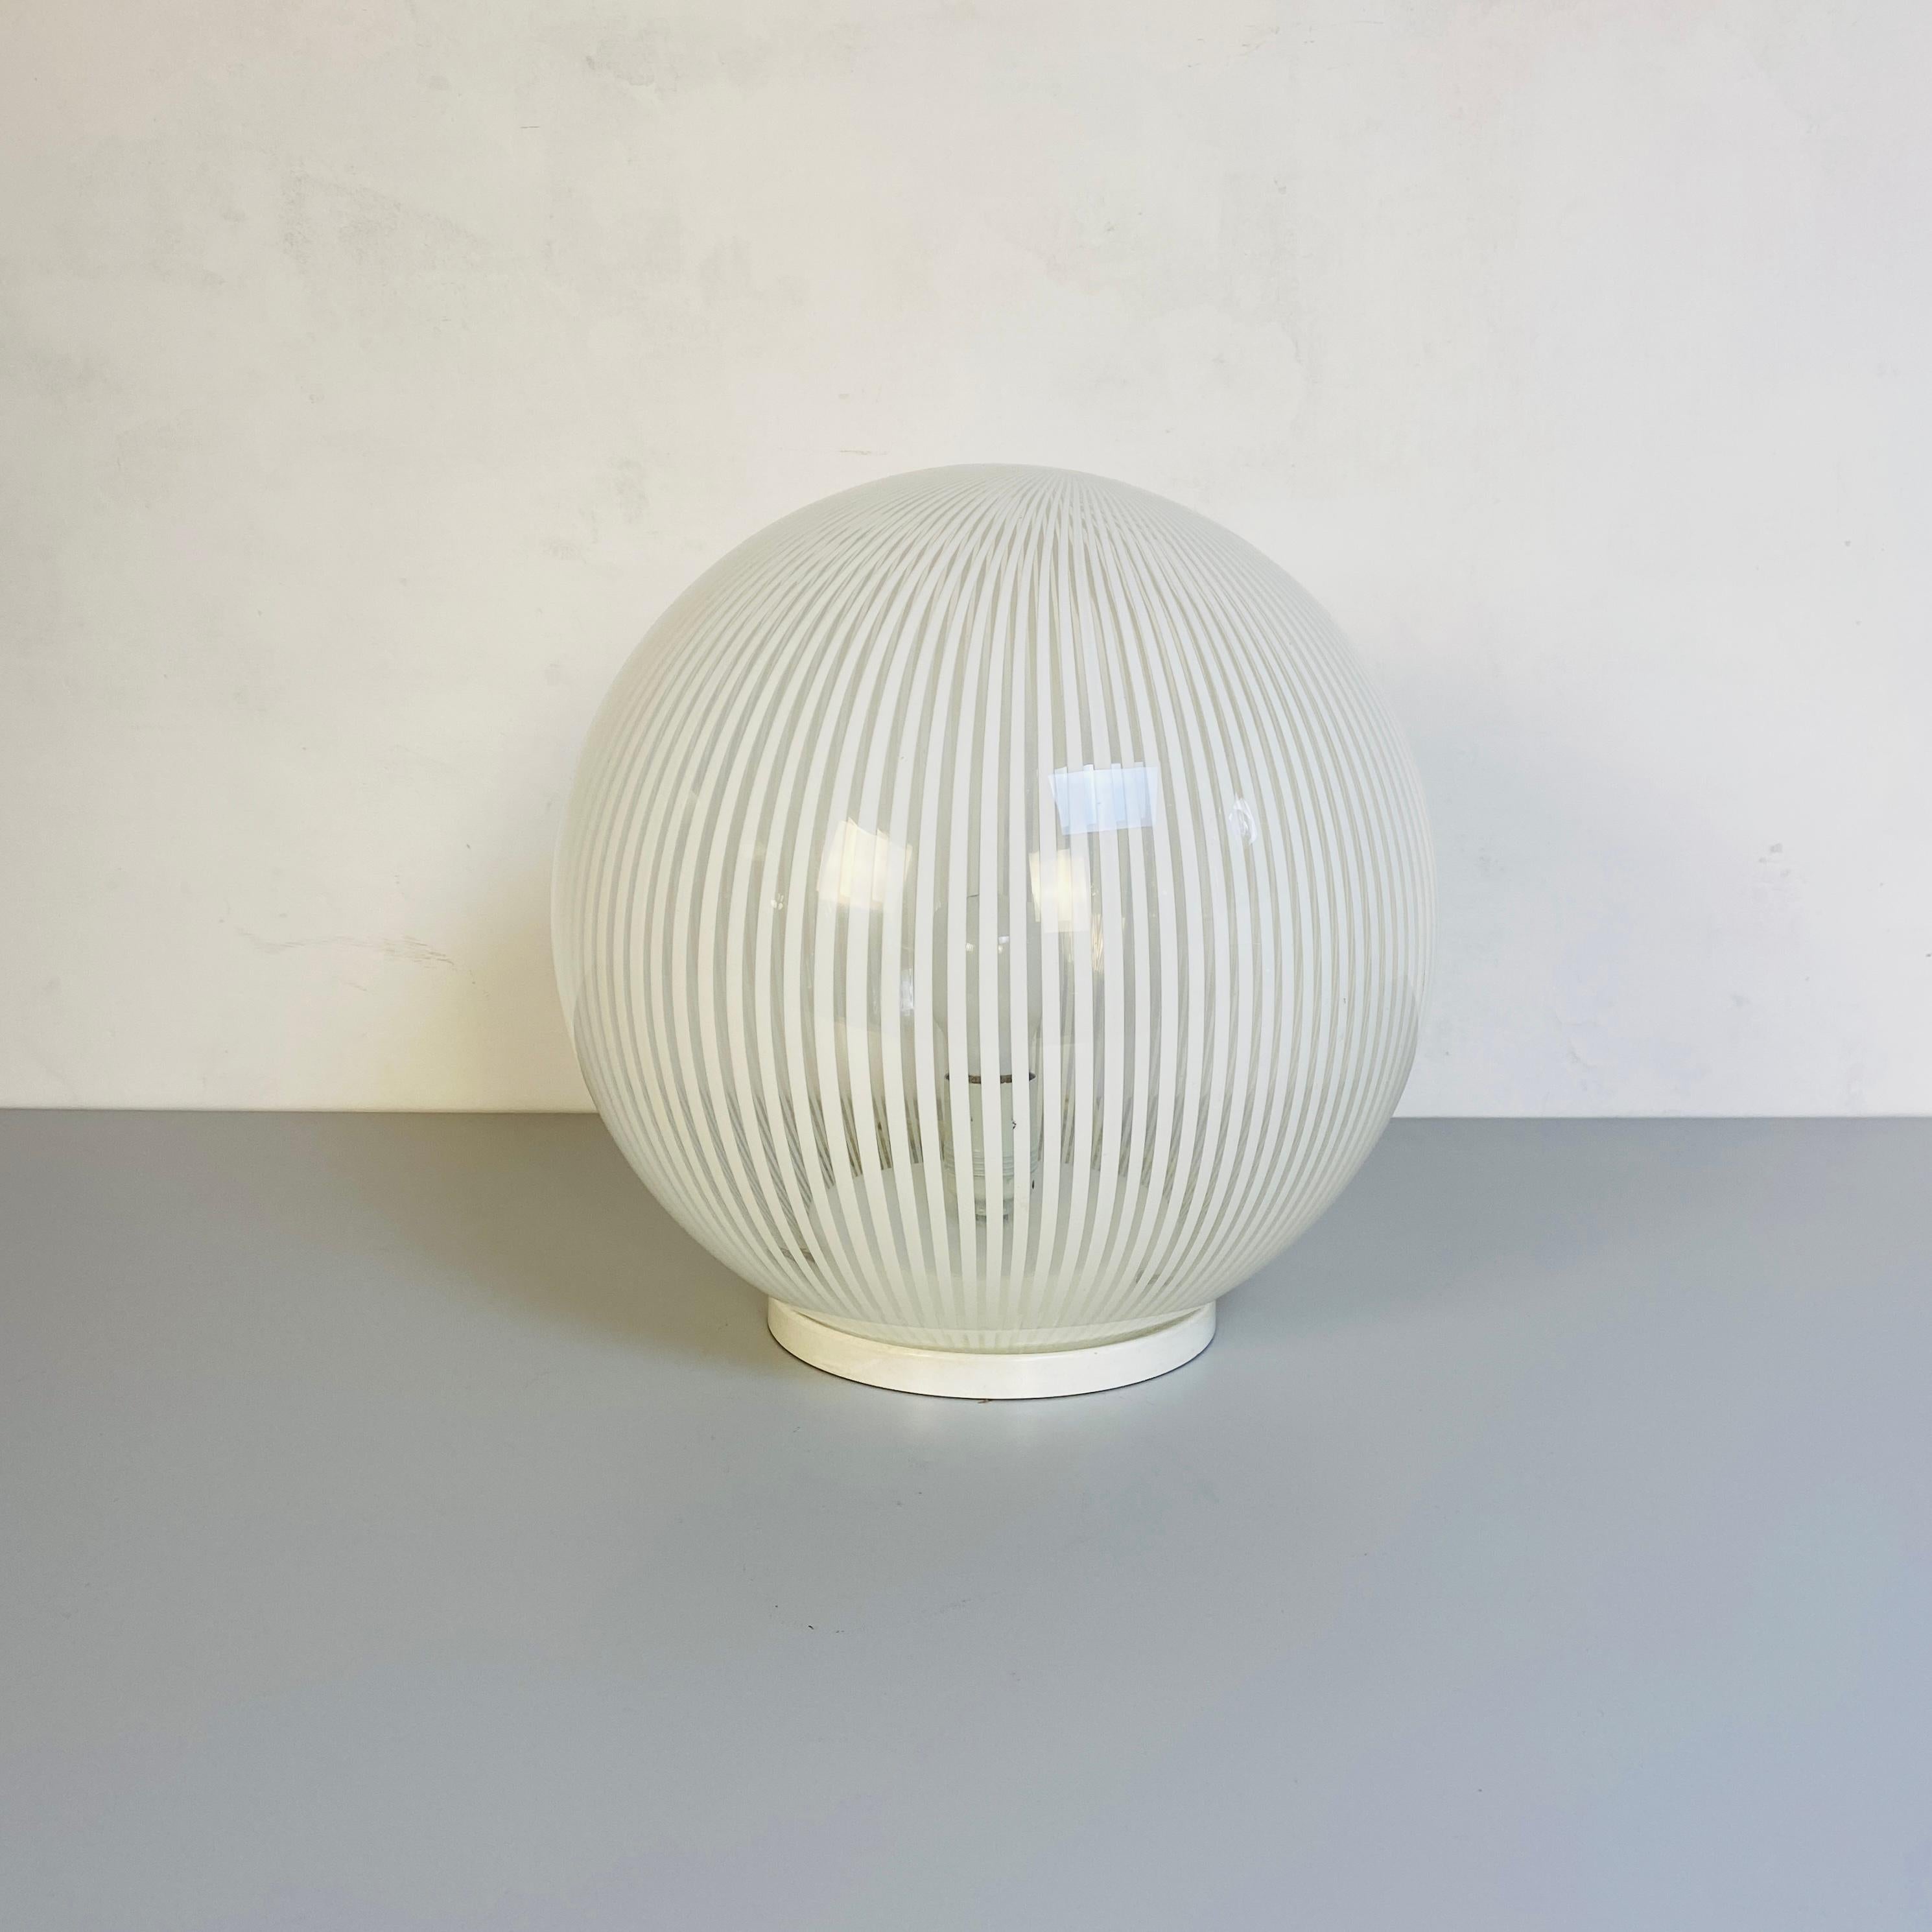 Italian Mid-Century Modern sphere table lamp byLudovico Diaz De Santillana for Venini Tessuti series, 1970s
Table lamp with white painted metal base and glass sphere decorated with white stripes. Made by Ludovico Diaz De Santillana for Venini